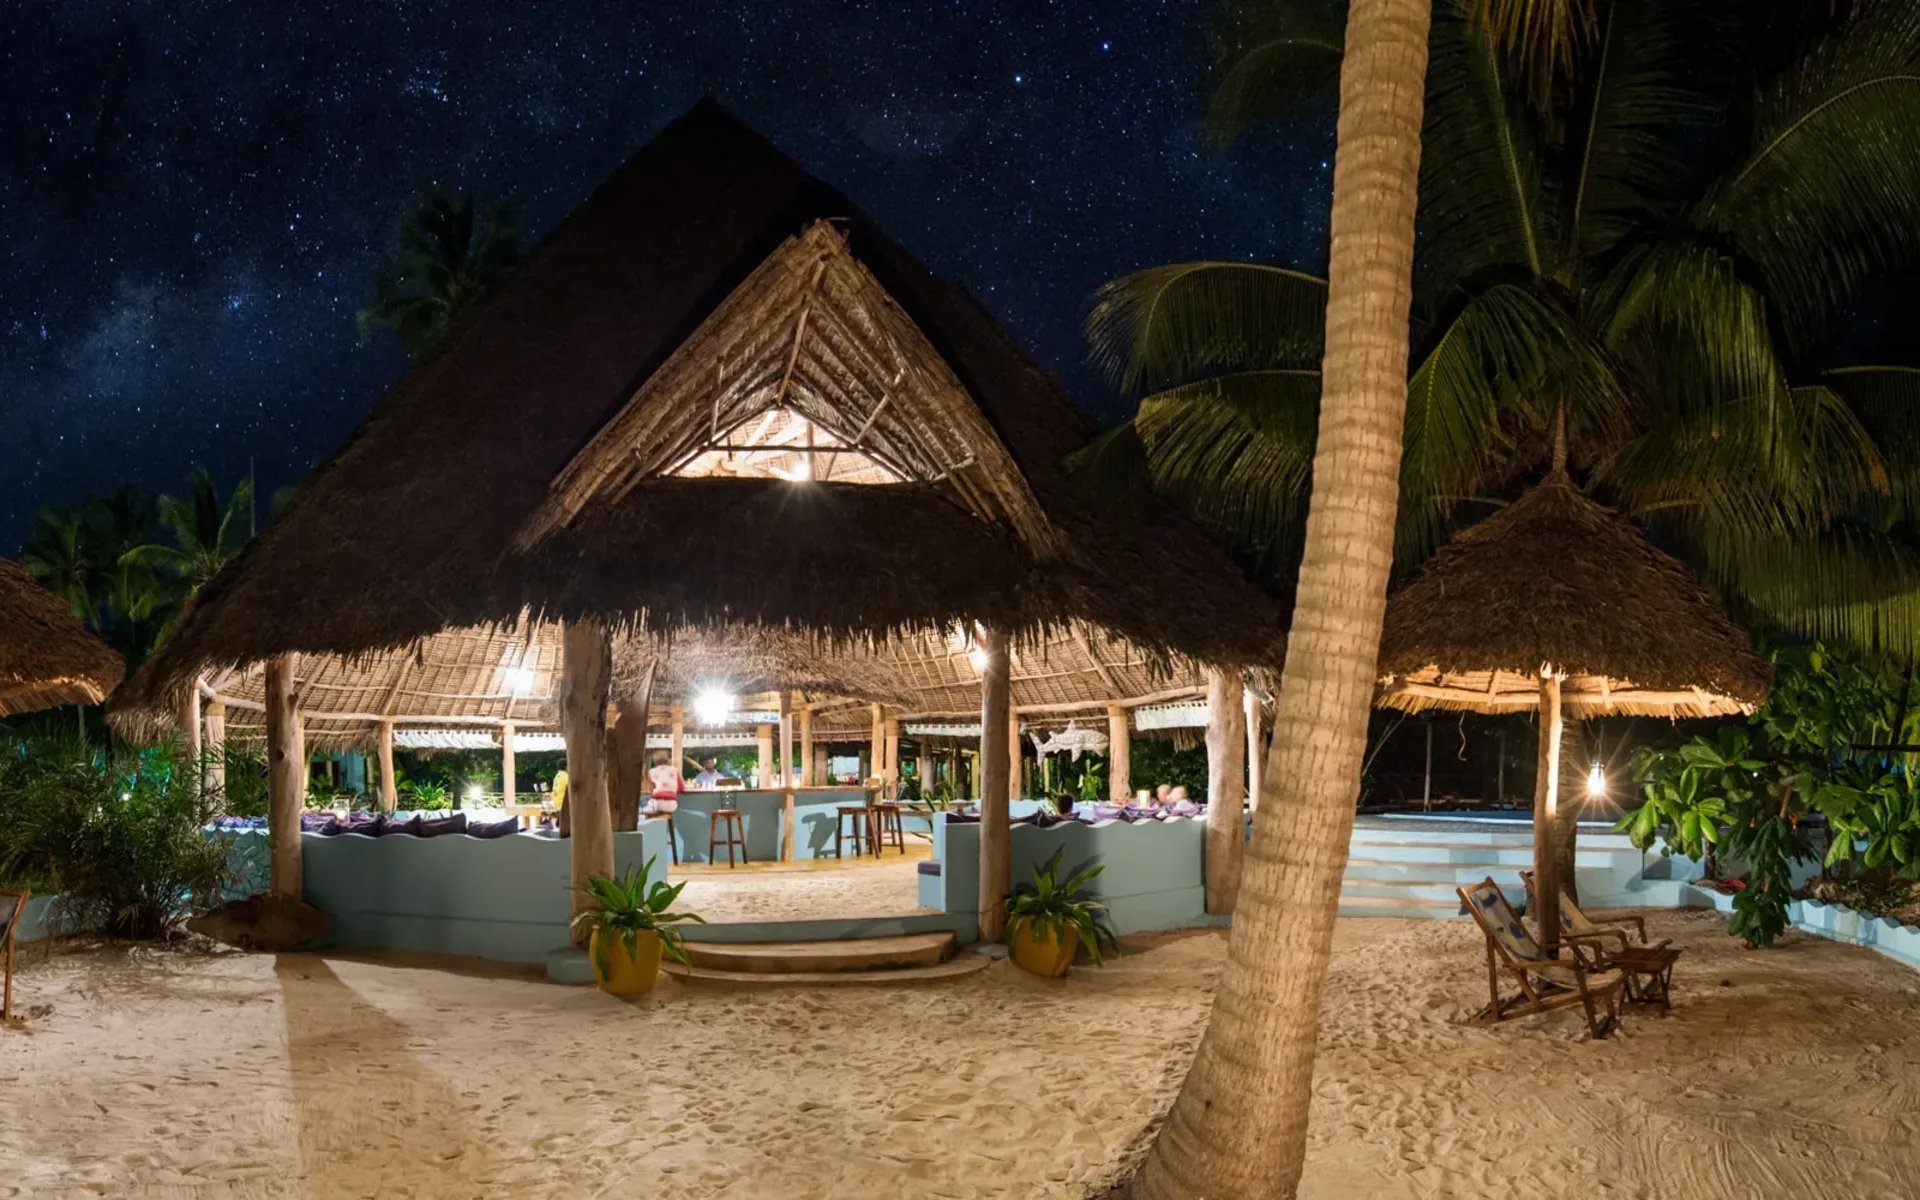 The thatched-roof beach bar at Butiama Beach Lodge is lit up by soft lighting during the evening. It is surrounded by tall palms.